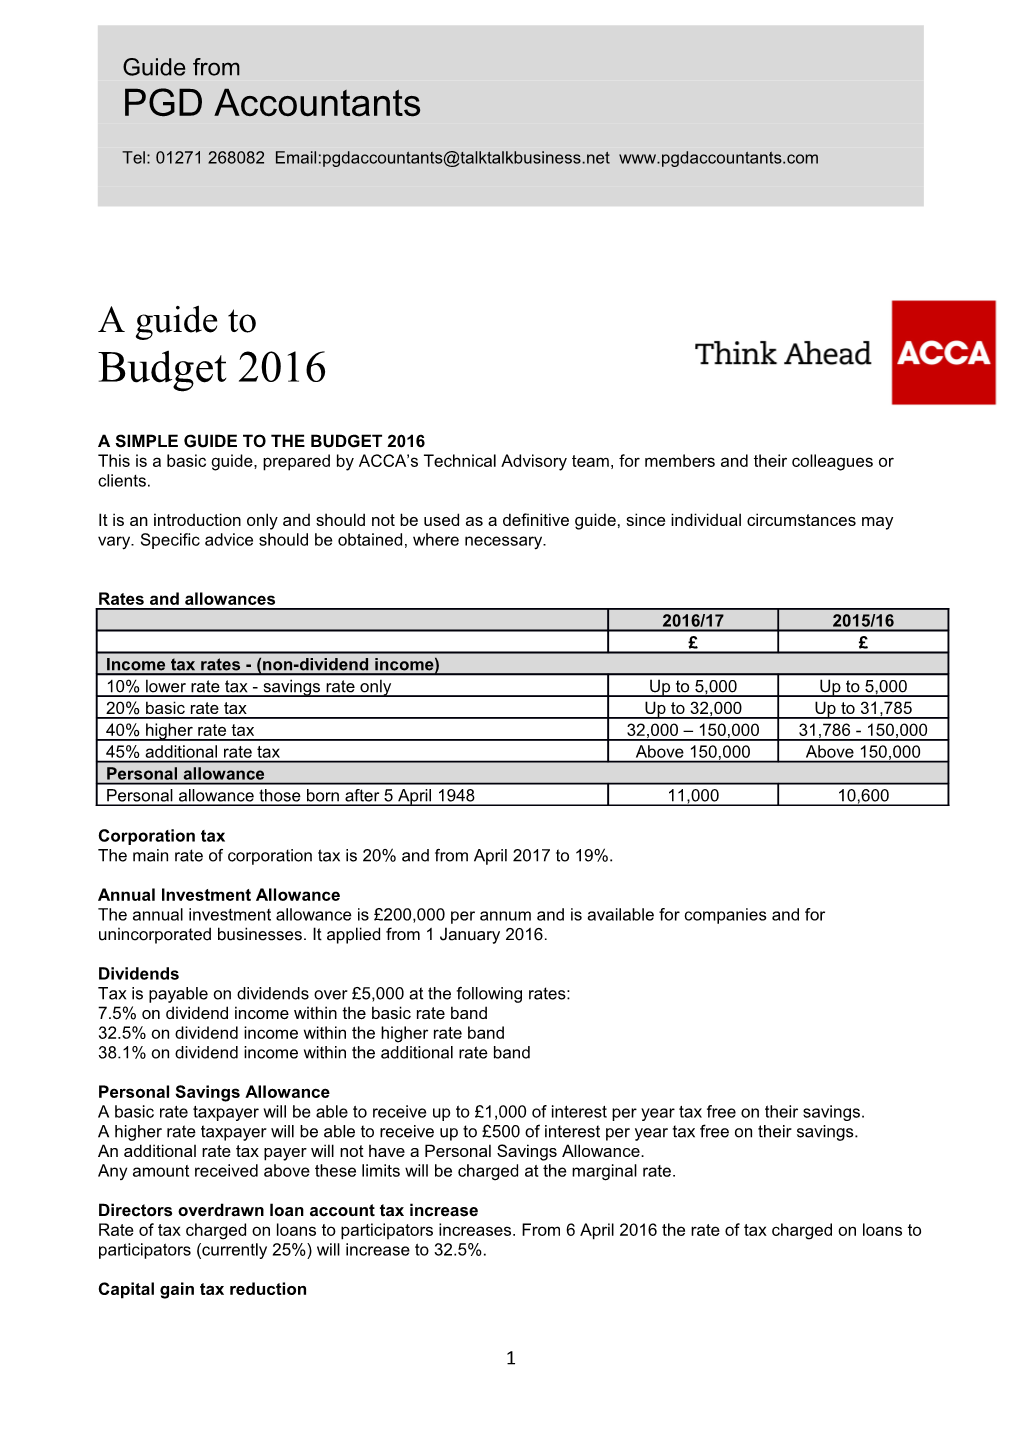 A Simple Guide to the Budget 2016